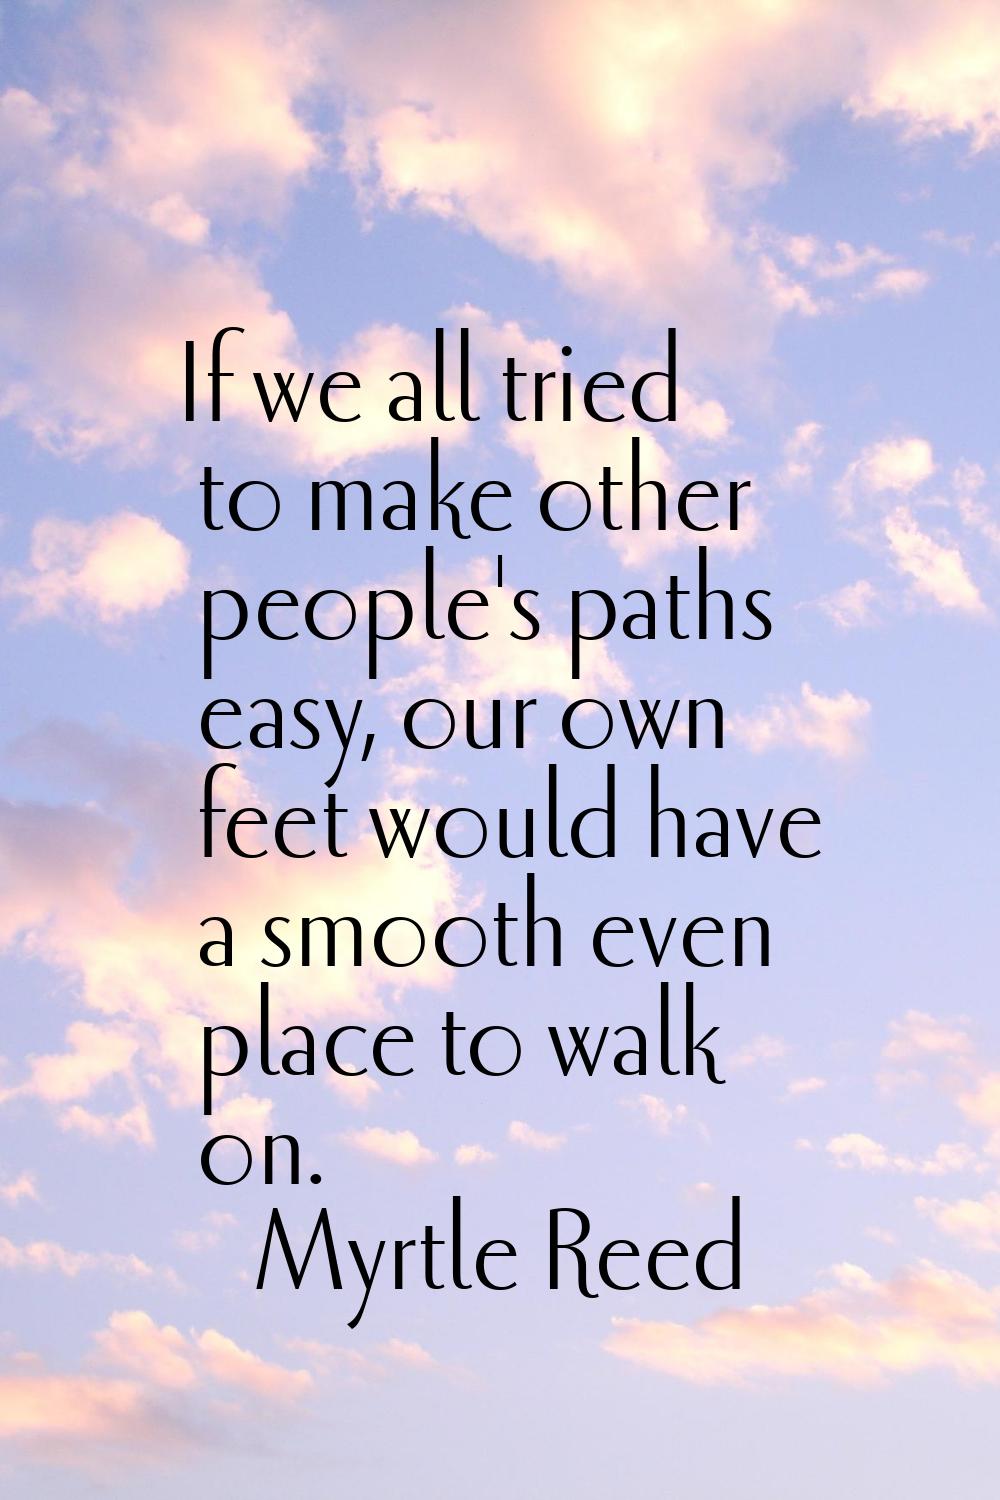 If we all tried to make other people's paths easy, our own feet would have a smooth even place to w